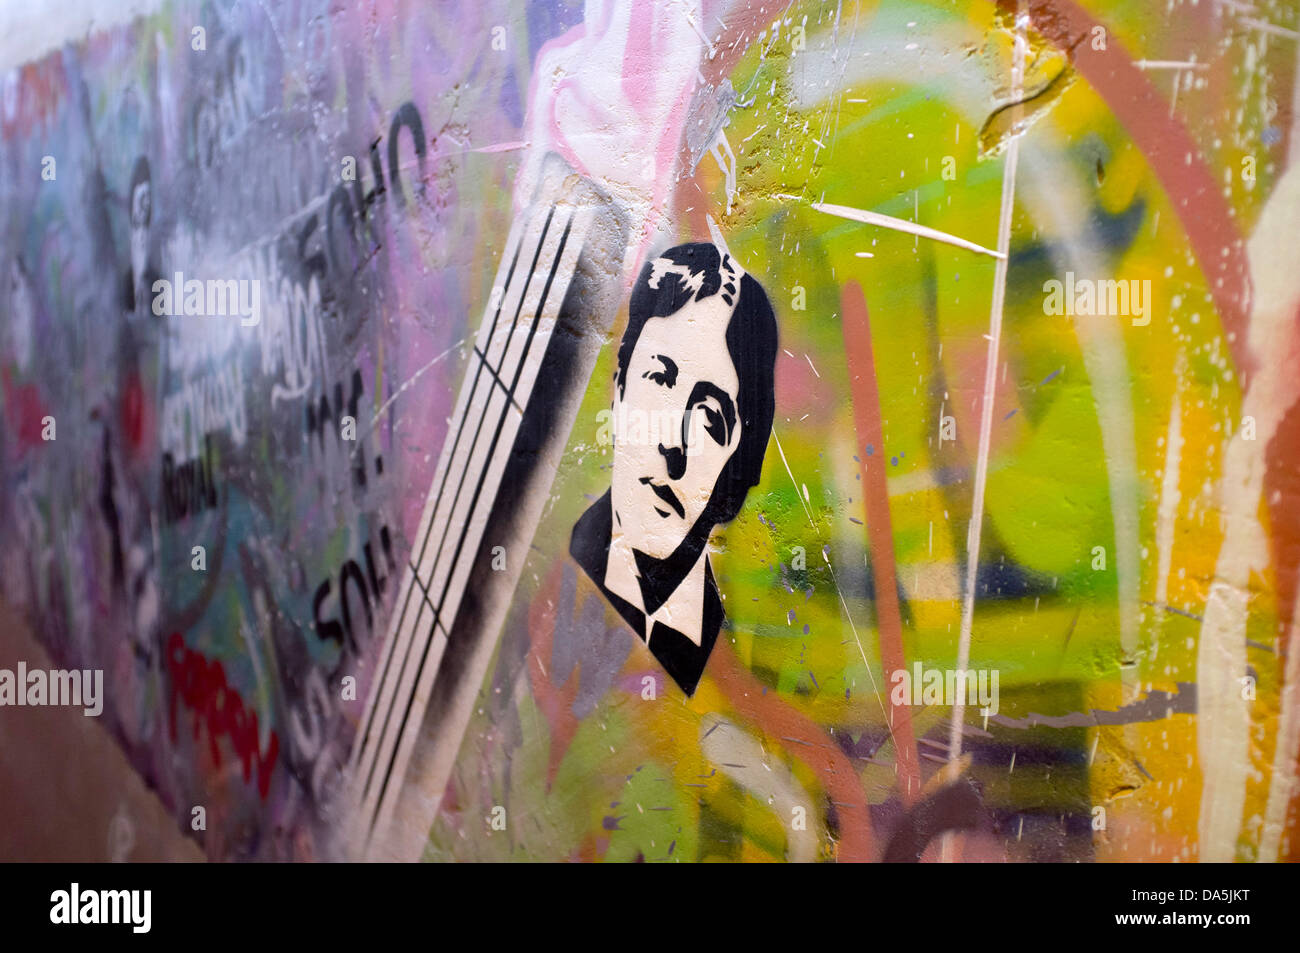 Interior of The Red Stars Hotel. a black and white image of Oscar Wilde on the wall incorporated into a decorative mural. Stock Photo